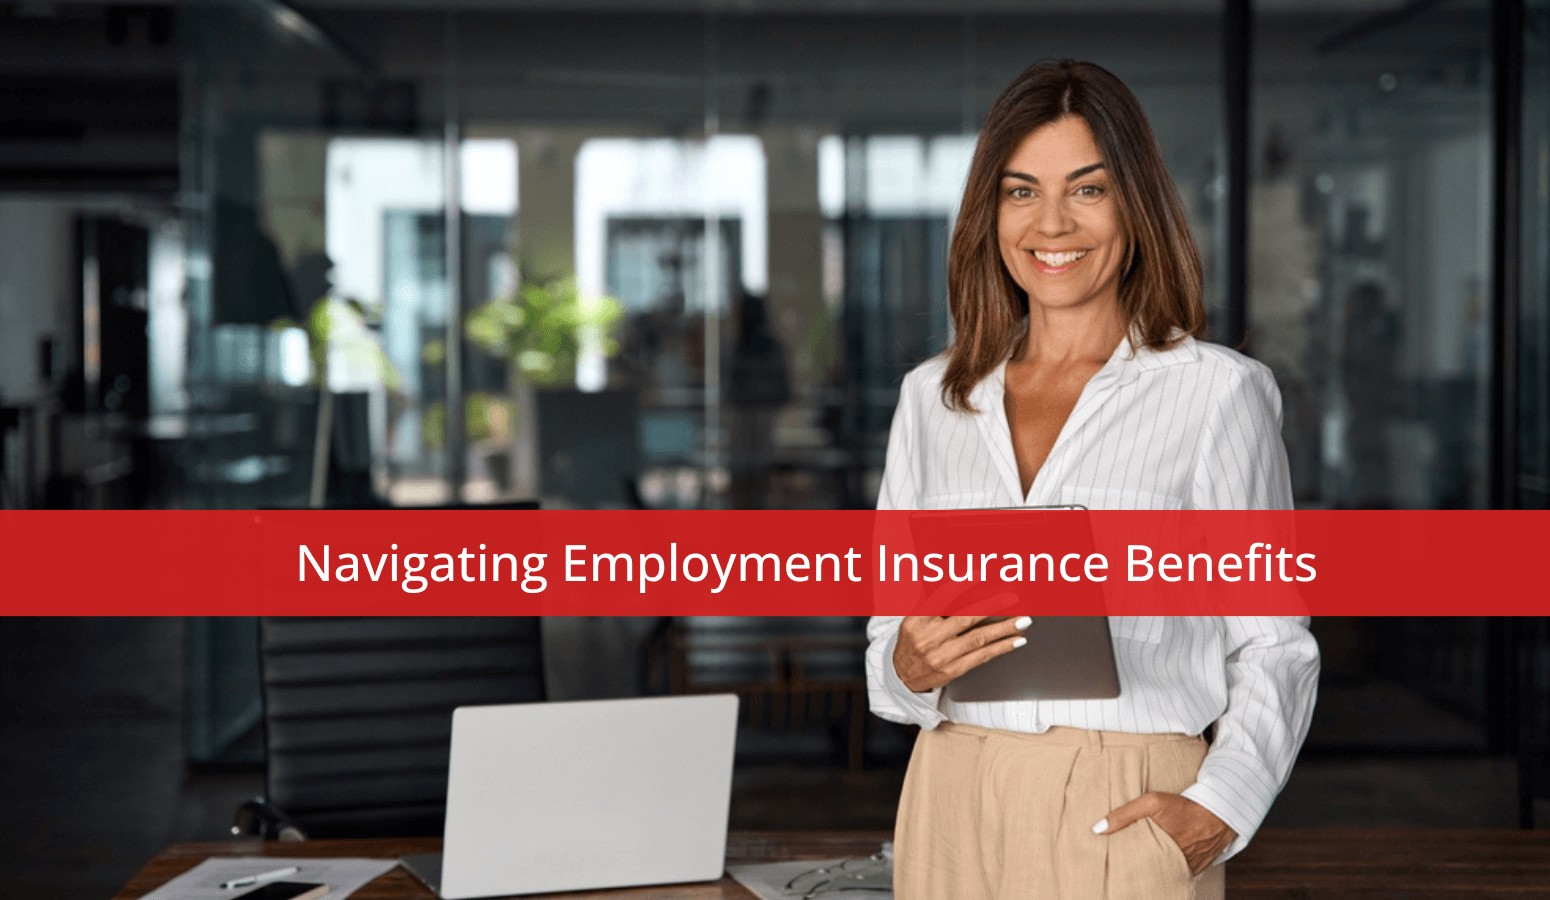 Featured image for “Navigating Employment Insurance Benefits”